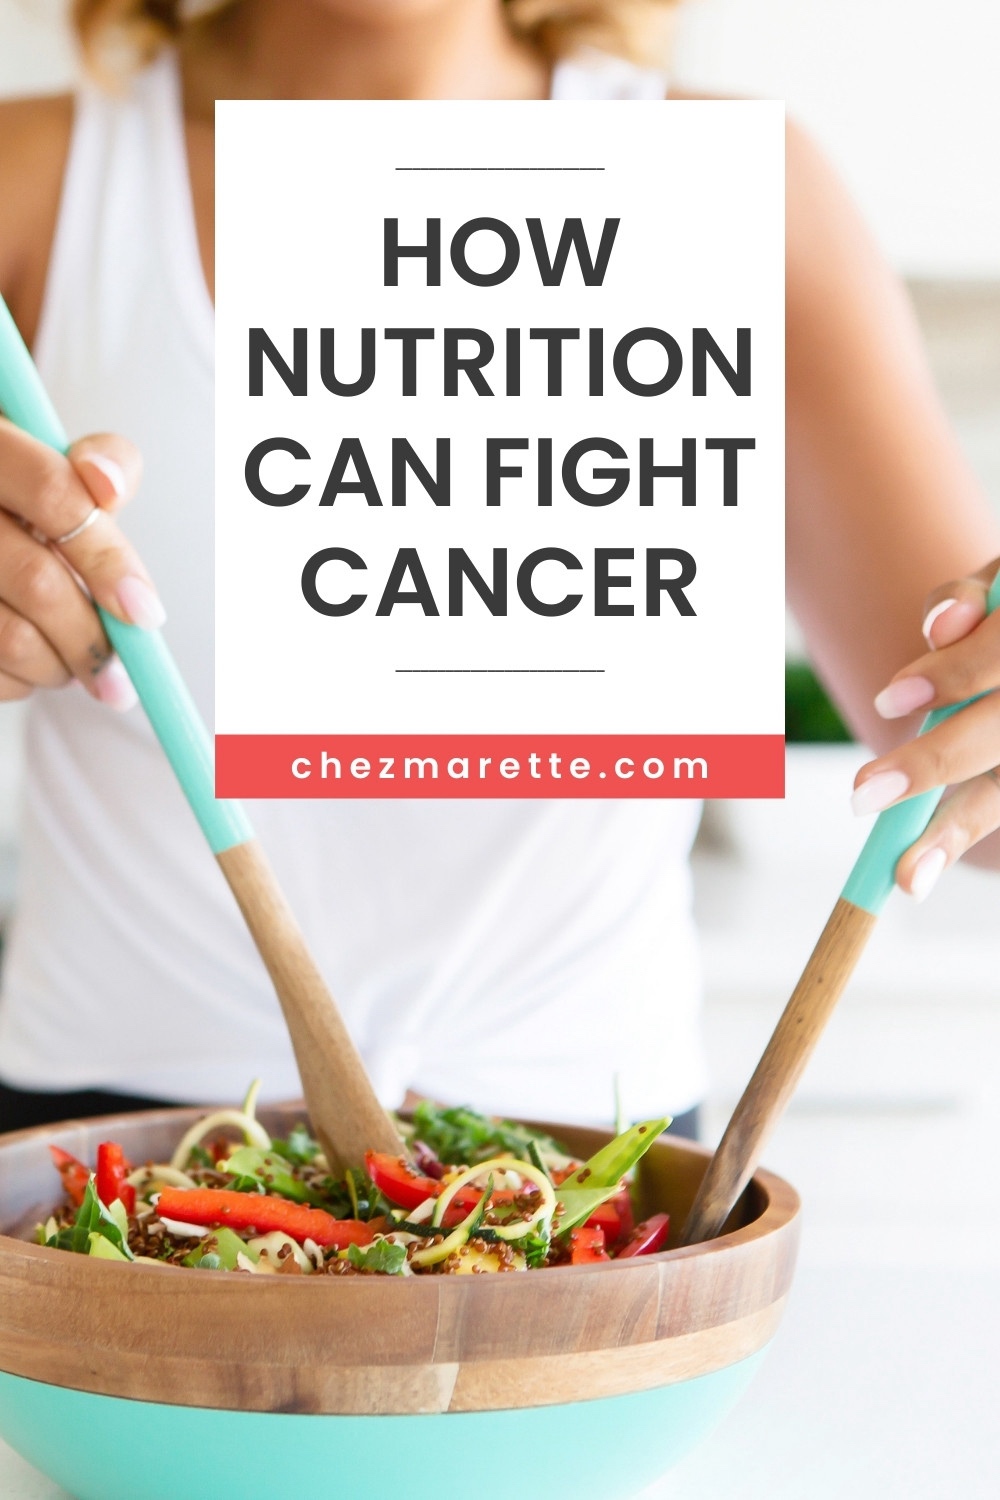 How nutrition can fight cancer